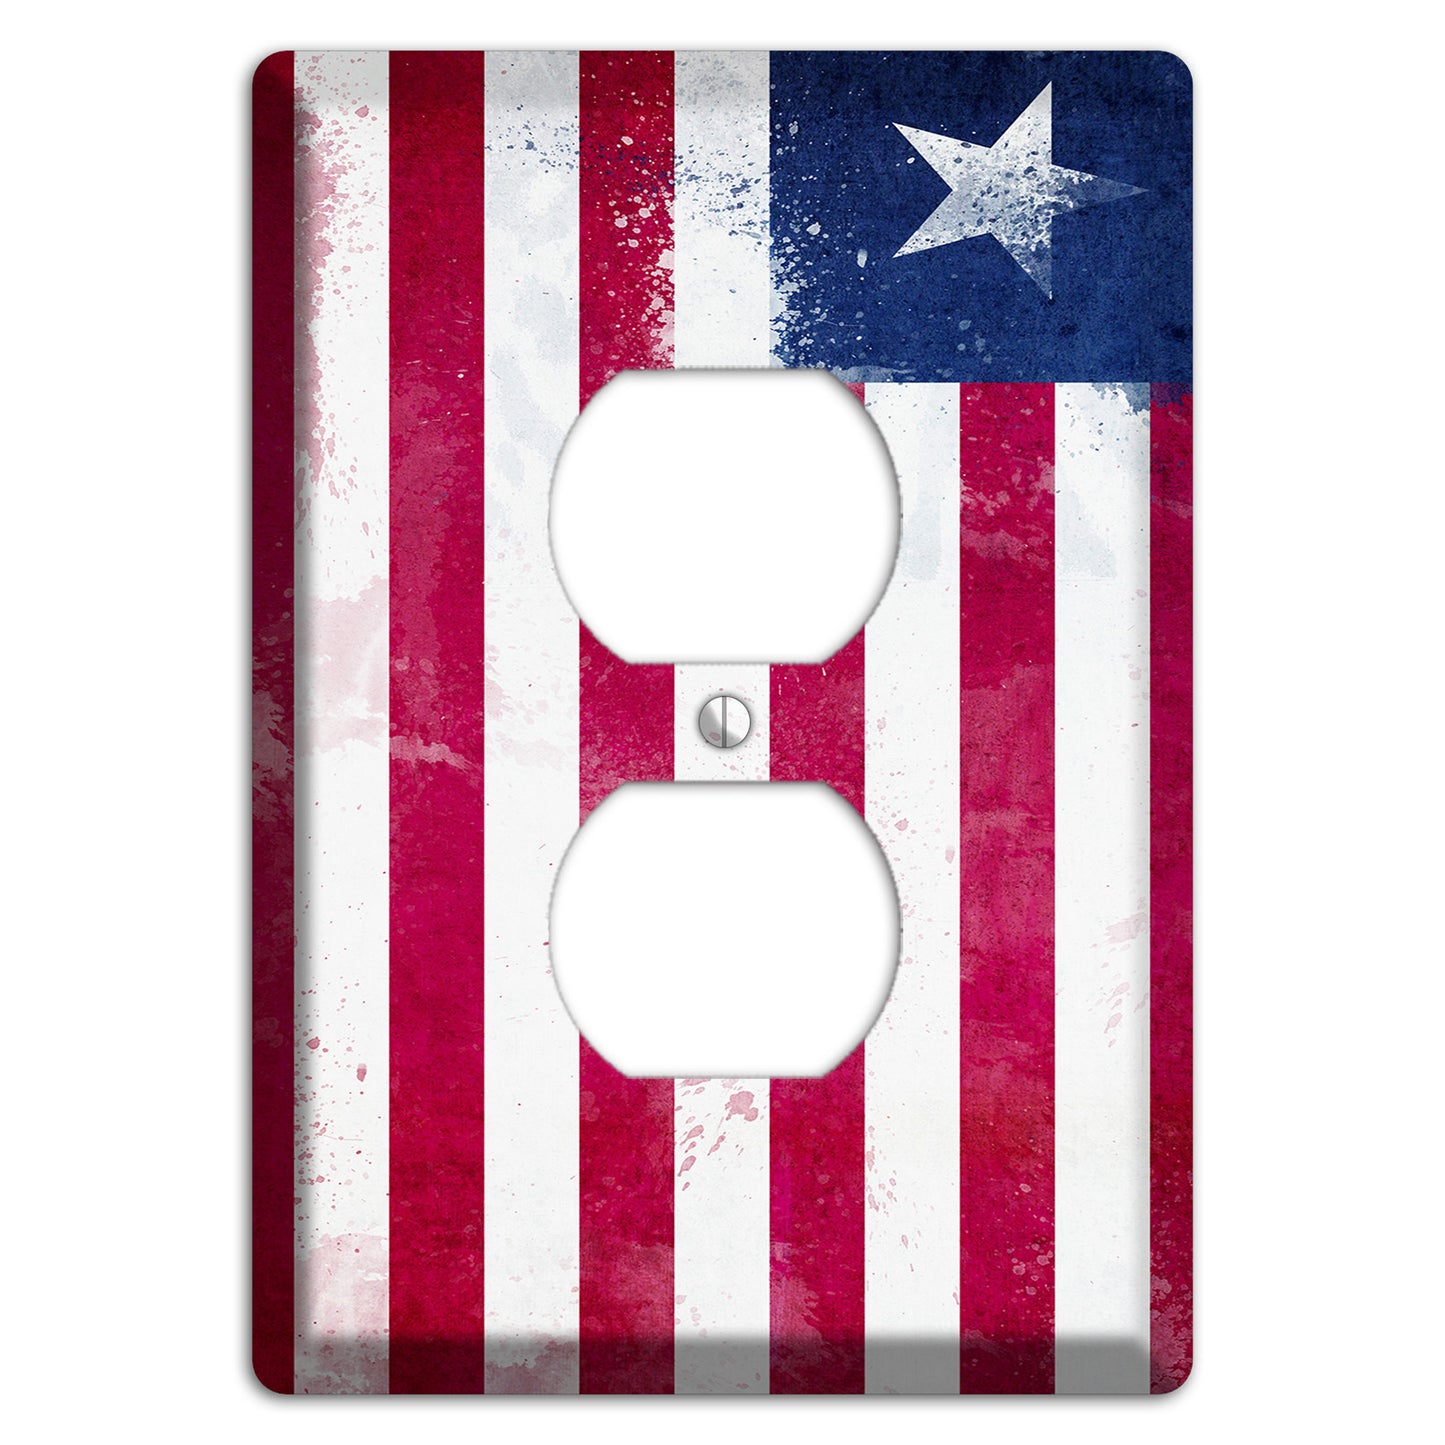 Liberia Cover Plates Duplex Outlet Wallplate